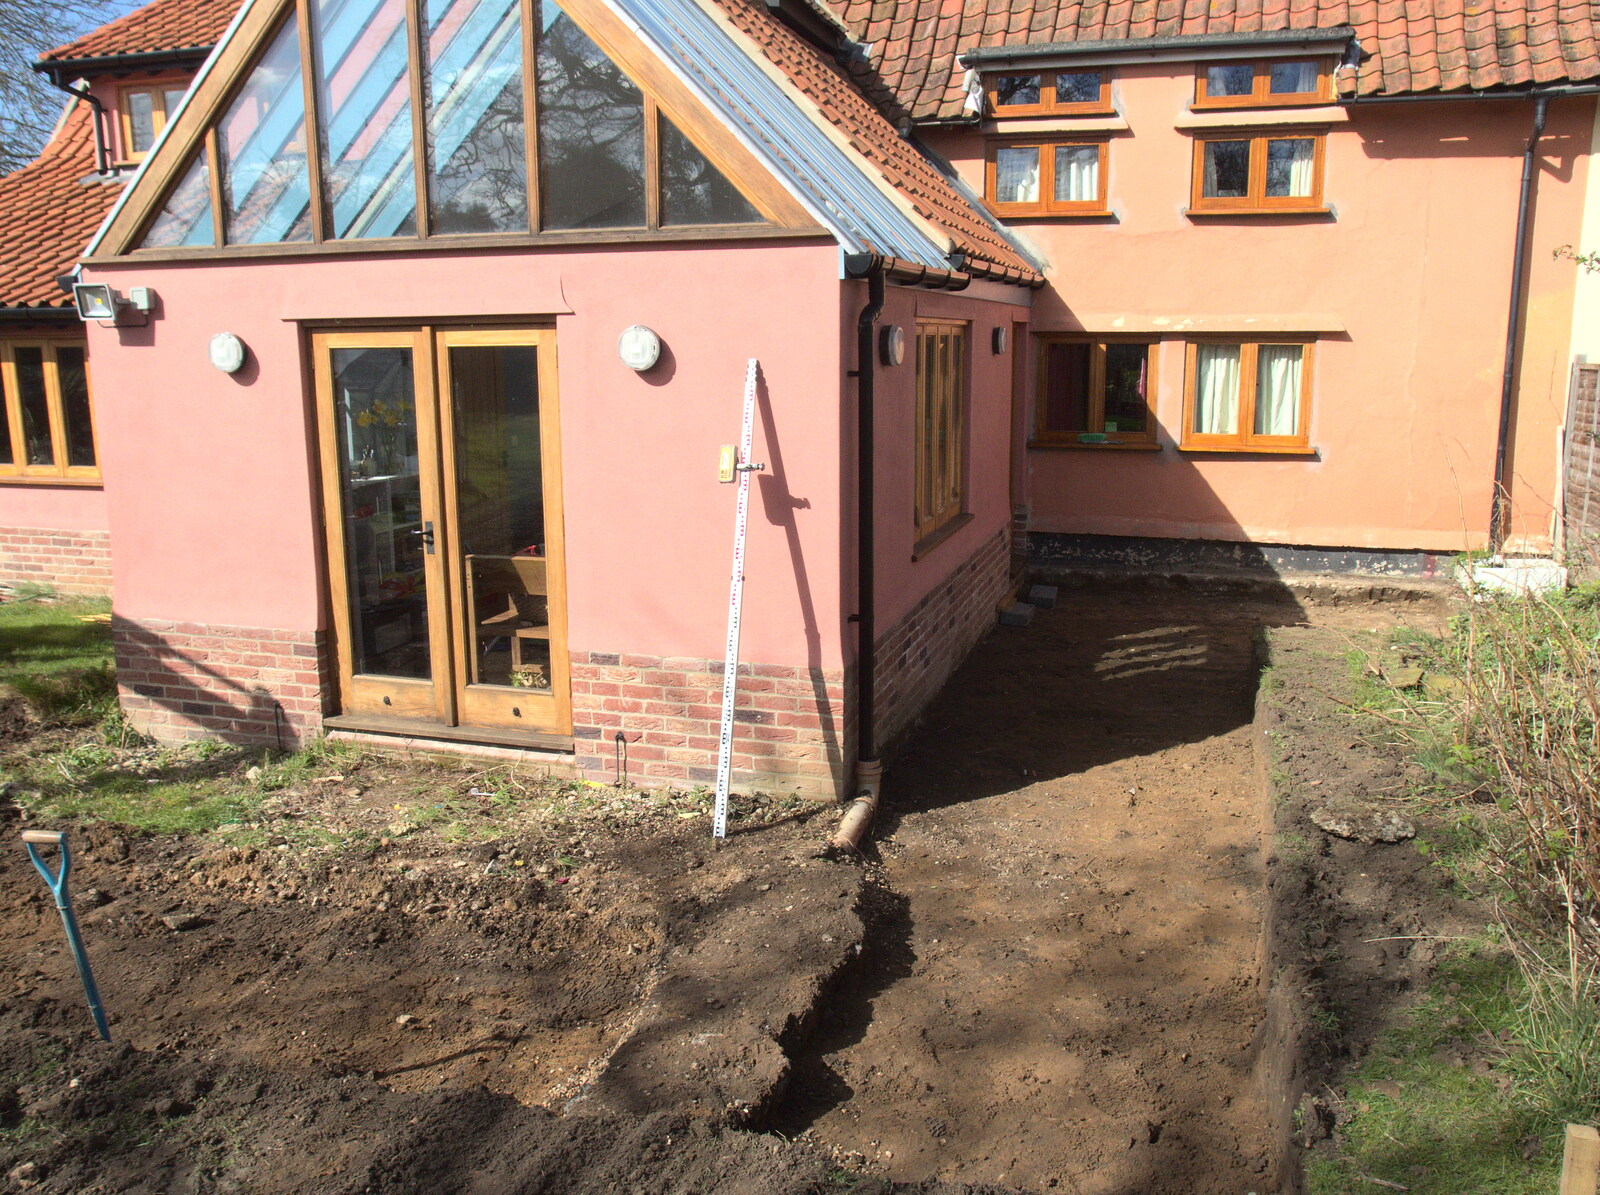 A new patio is dug from Digger Action and other March Miscellany, Suffolk and London - 21st March 2017